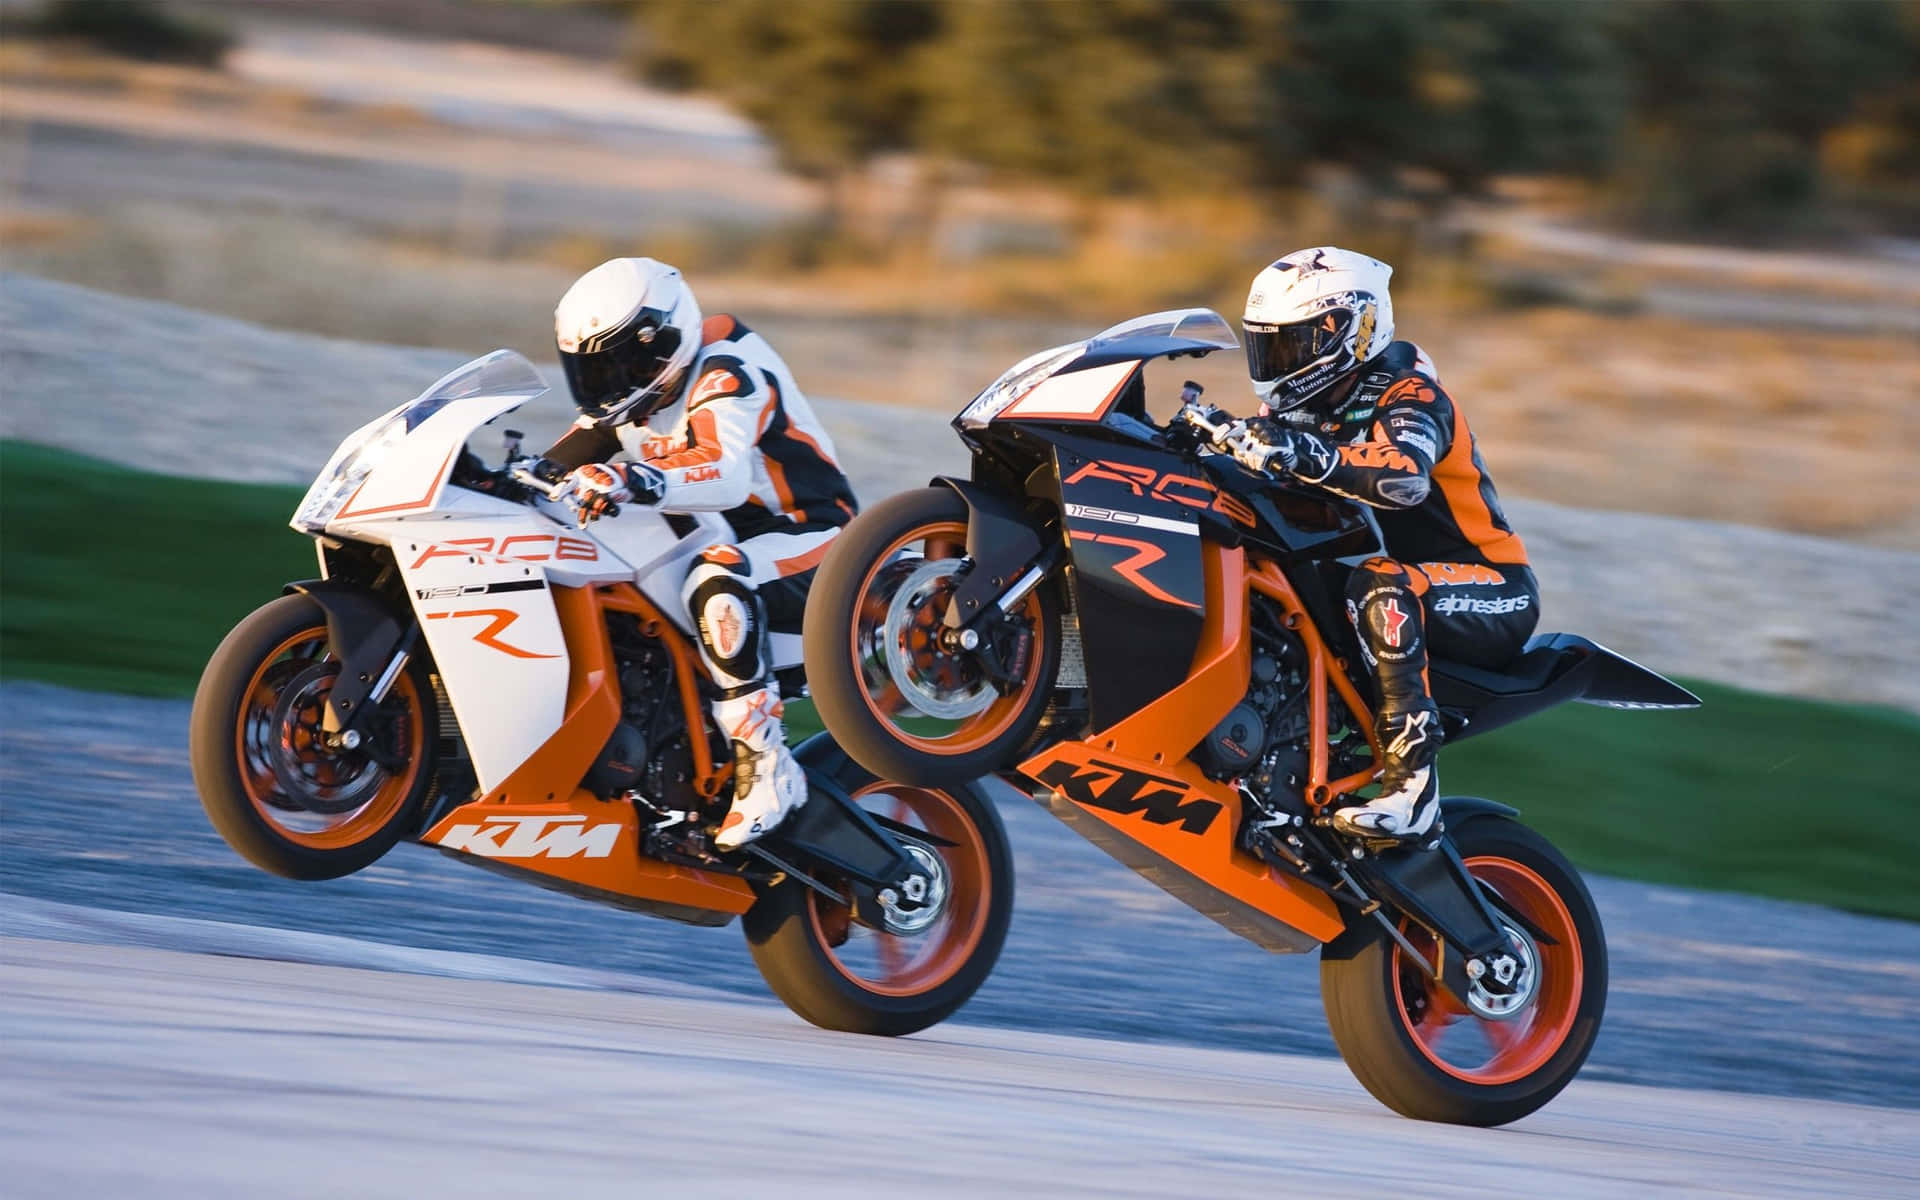 Two Motorcycle Riders Are Doing A Stunt On A Track